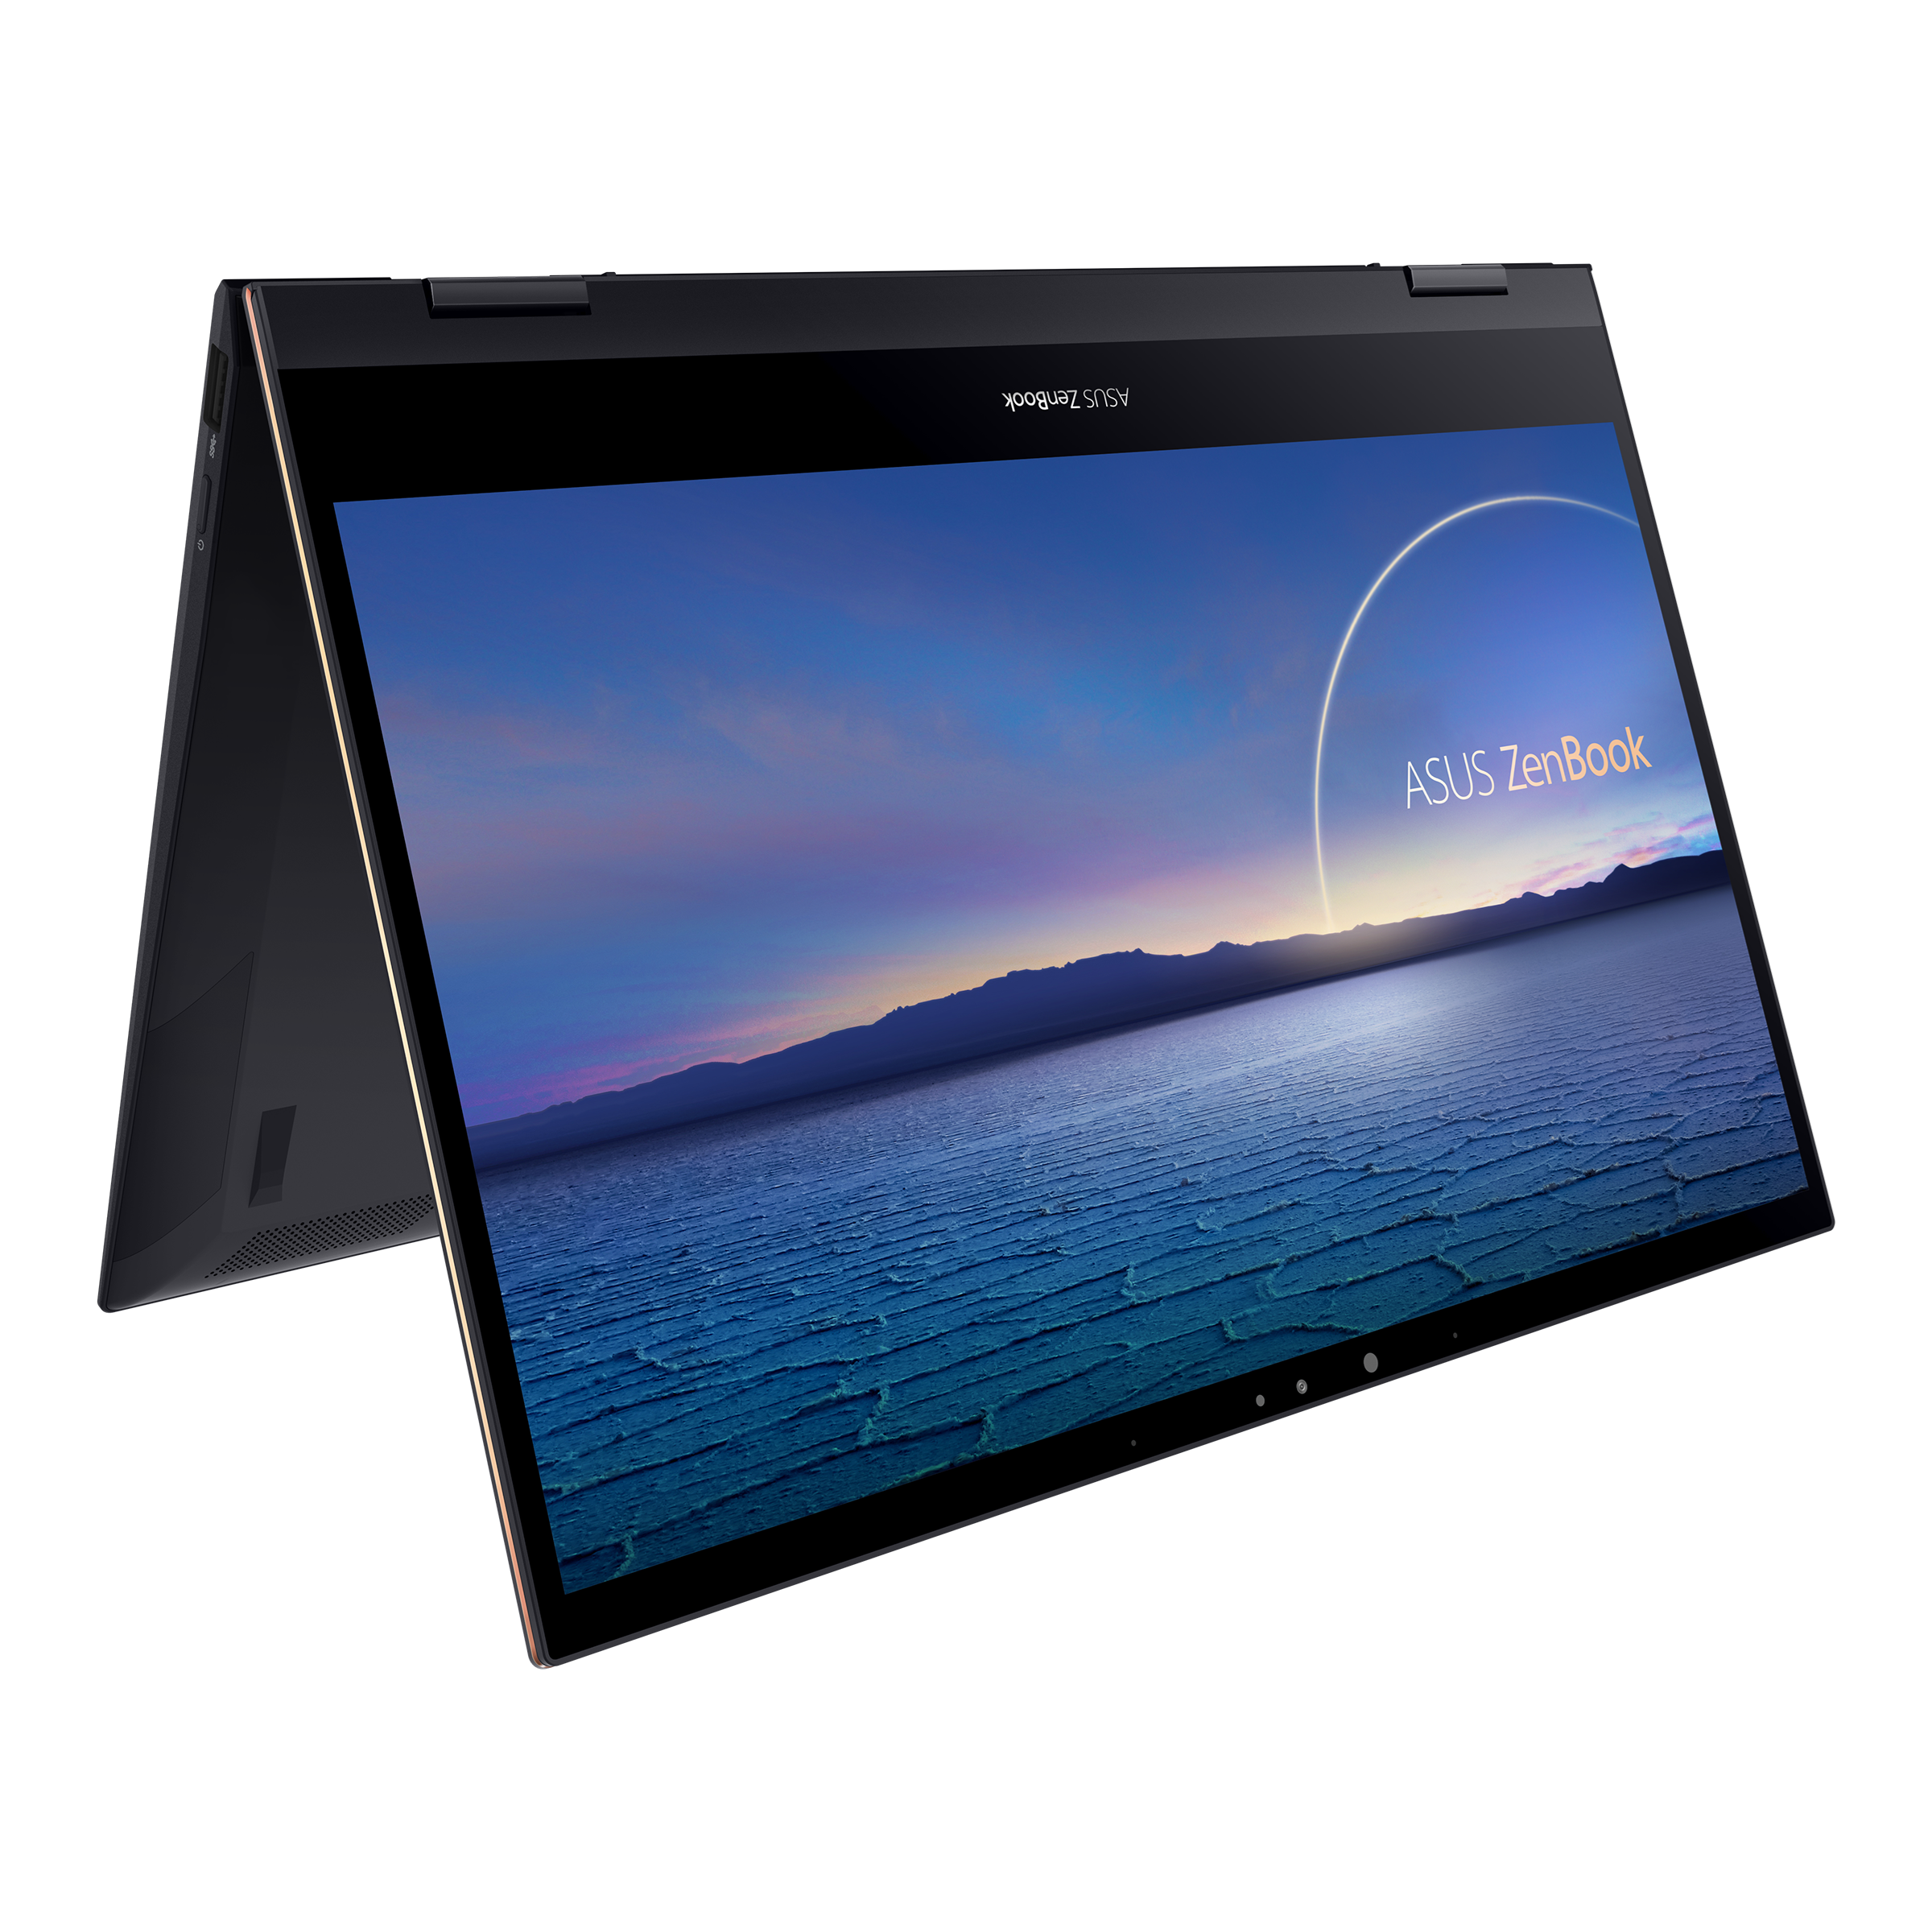 Zenbook 14X OLED (UX3404)｜Laptops For Home｜ASUS Global